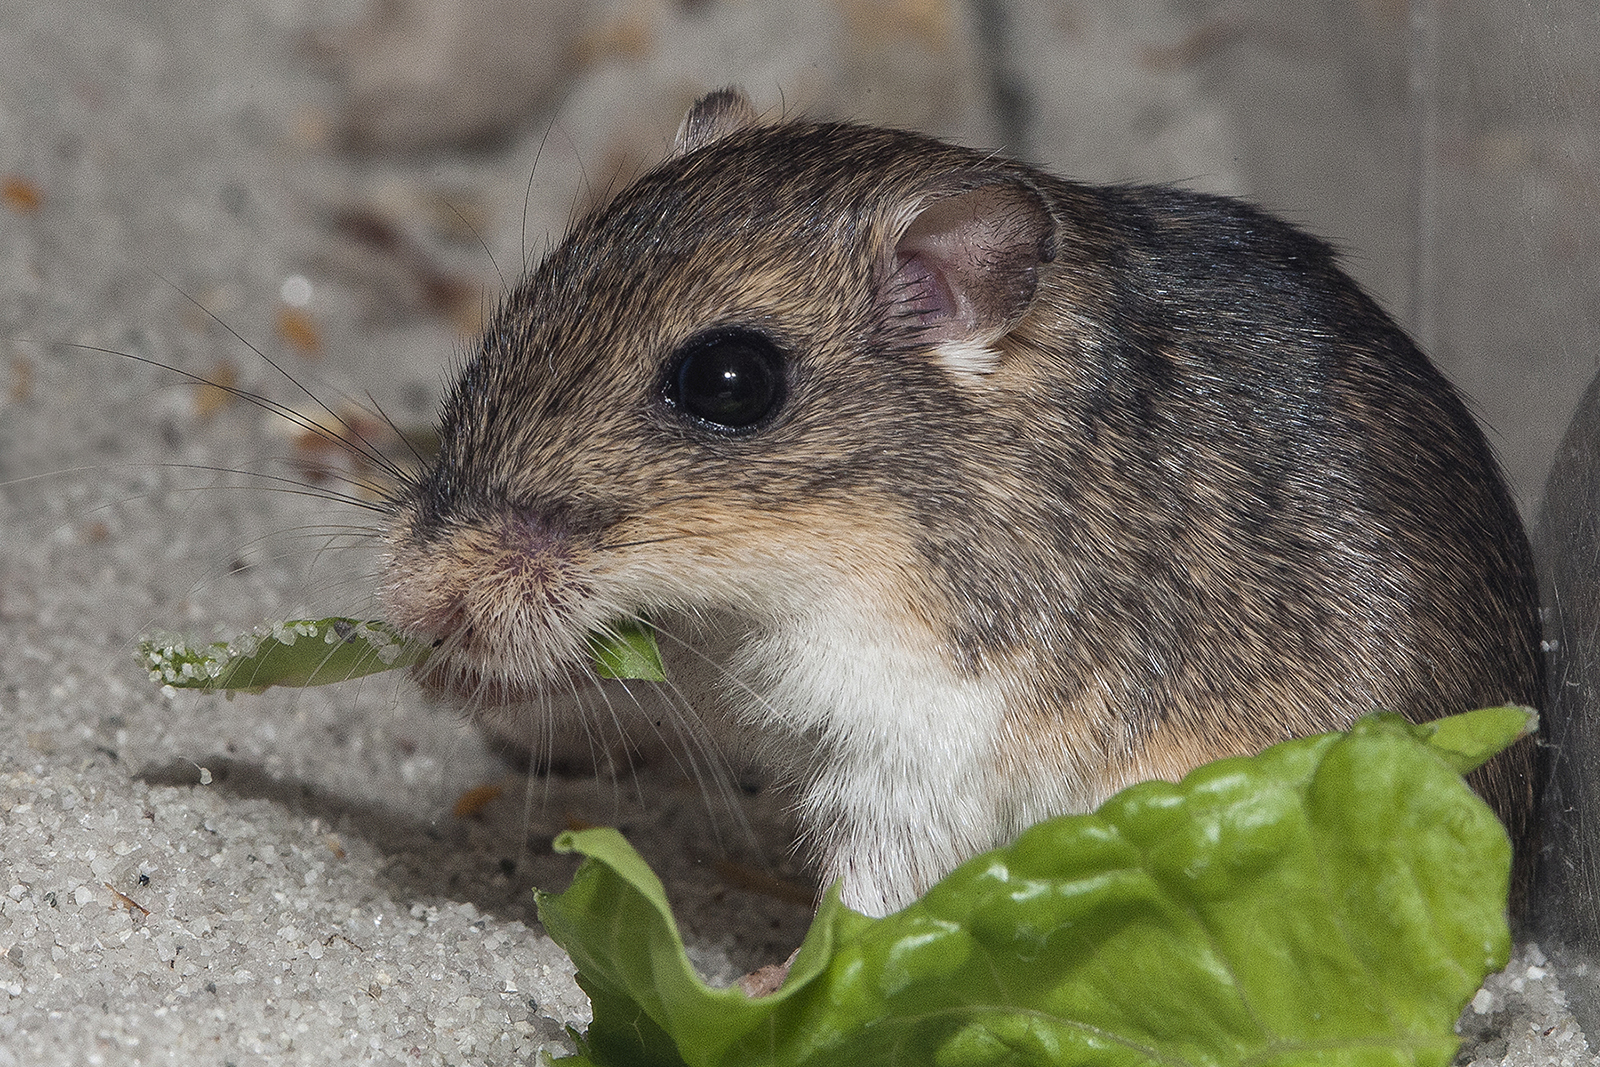 Pacific Pocket Mouse eating lettuce